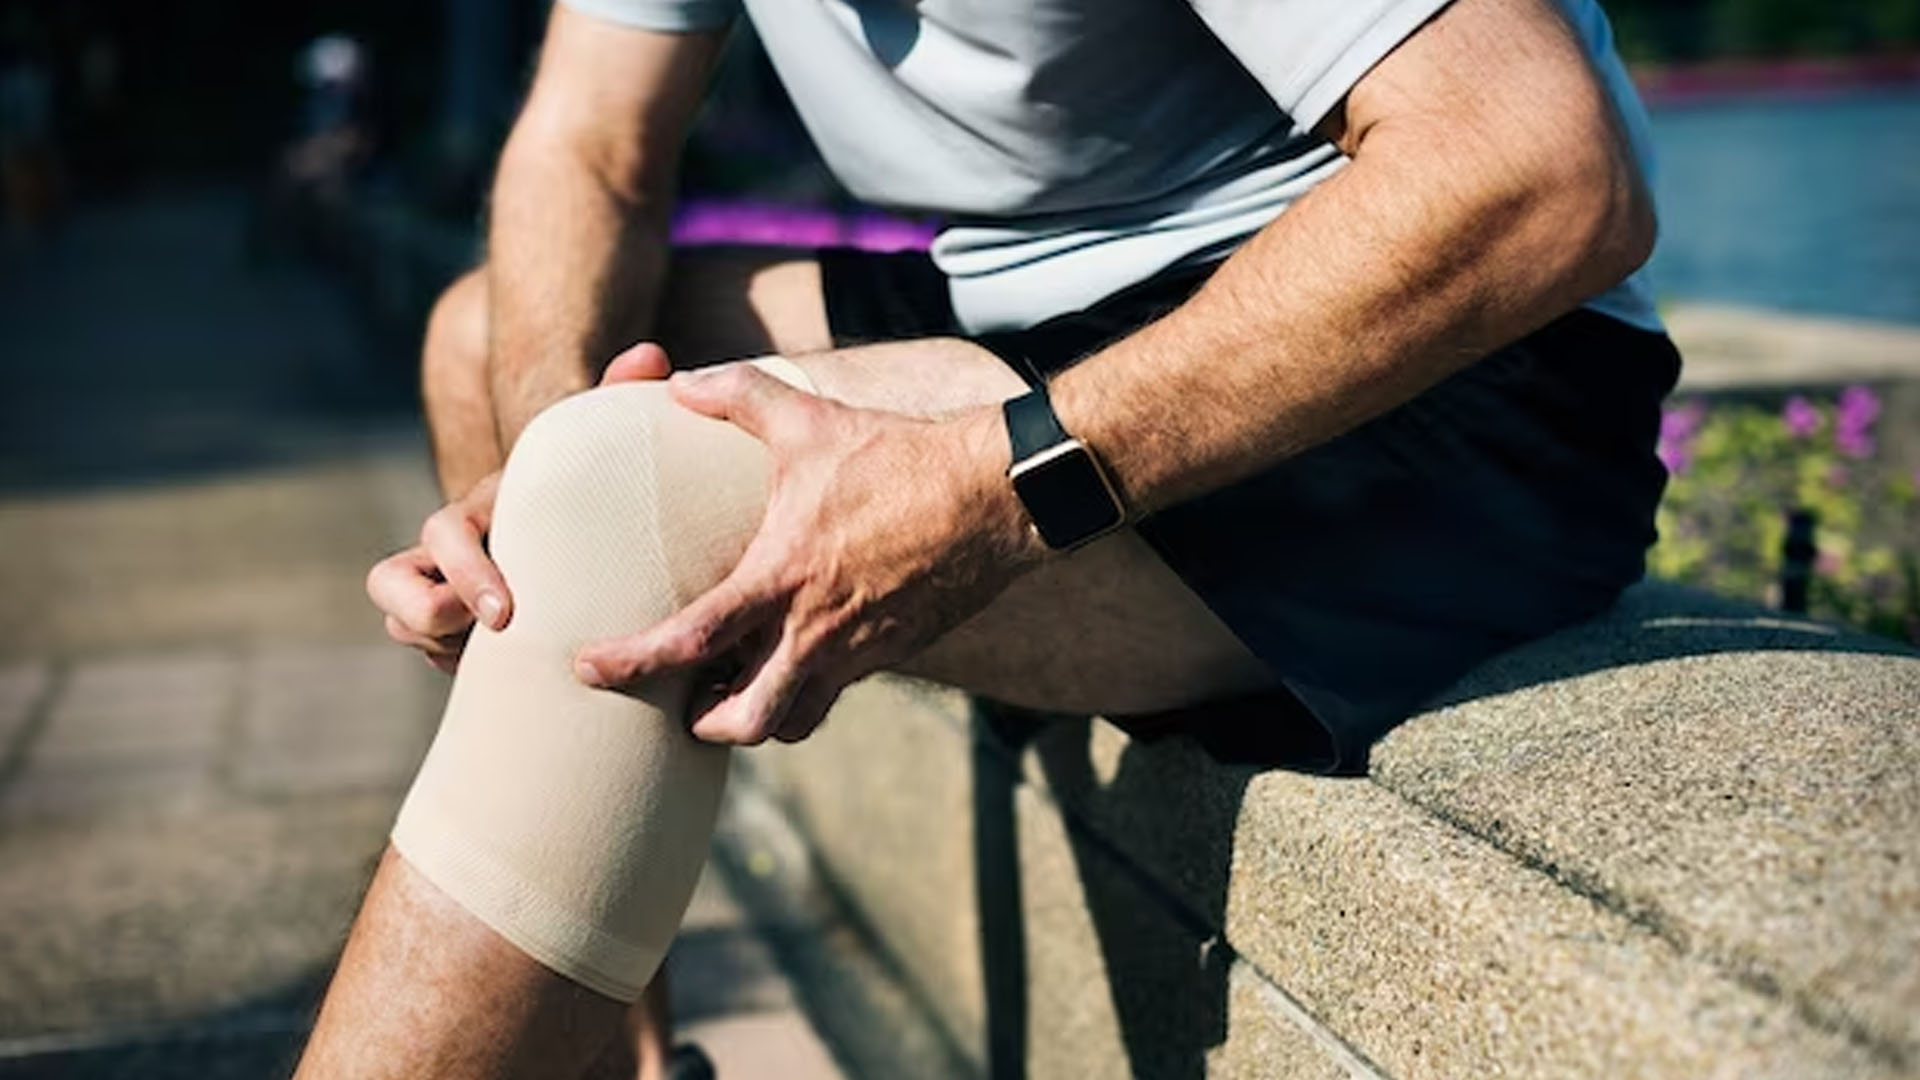 What are the Home Remedies on Ligament tear in knee?